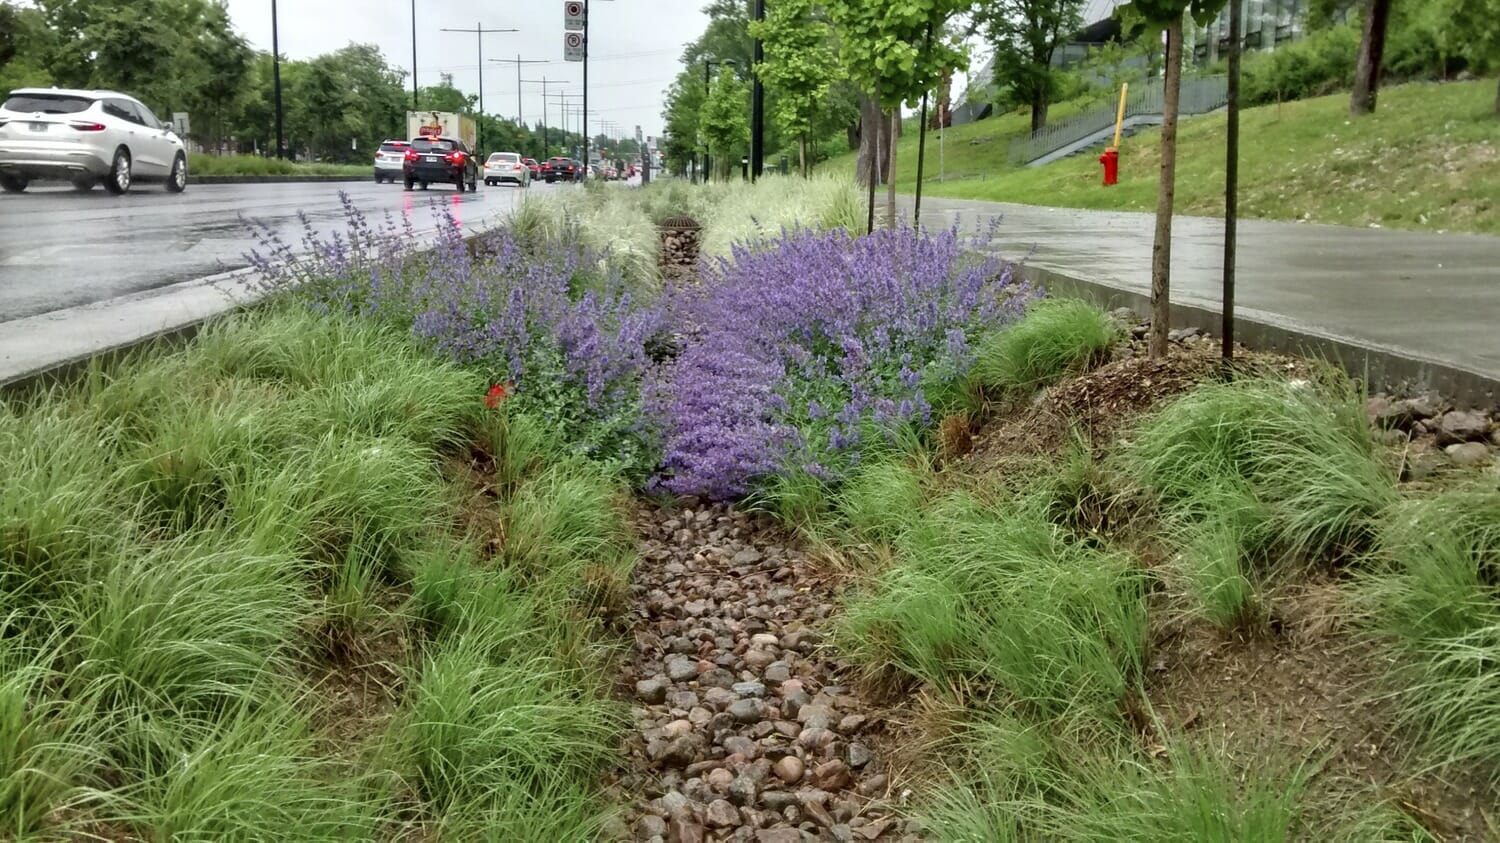 A street with purple flowers and grass next to a road.